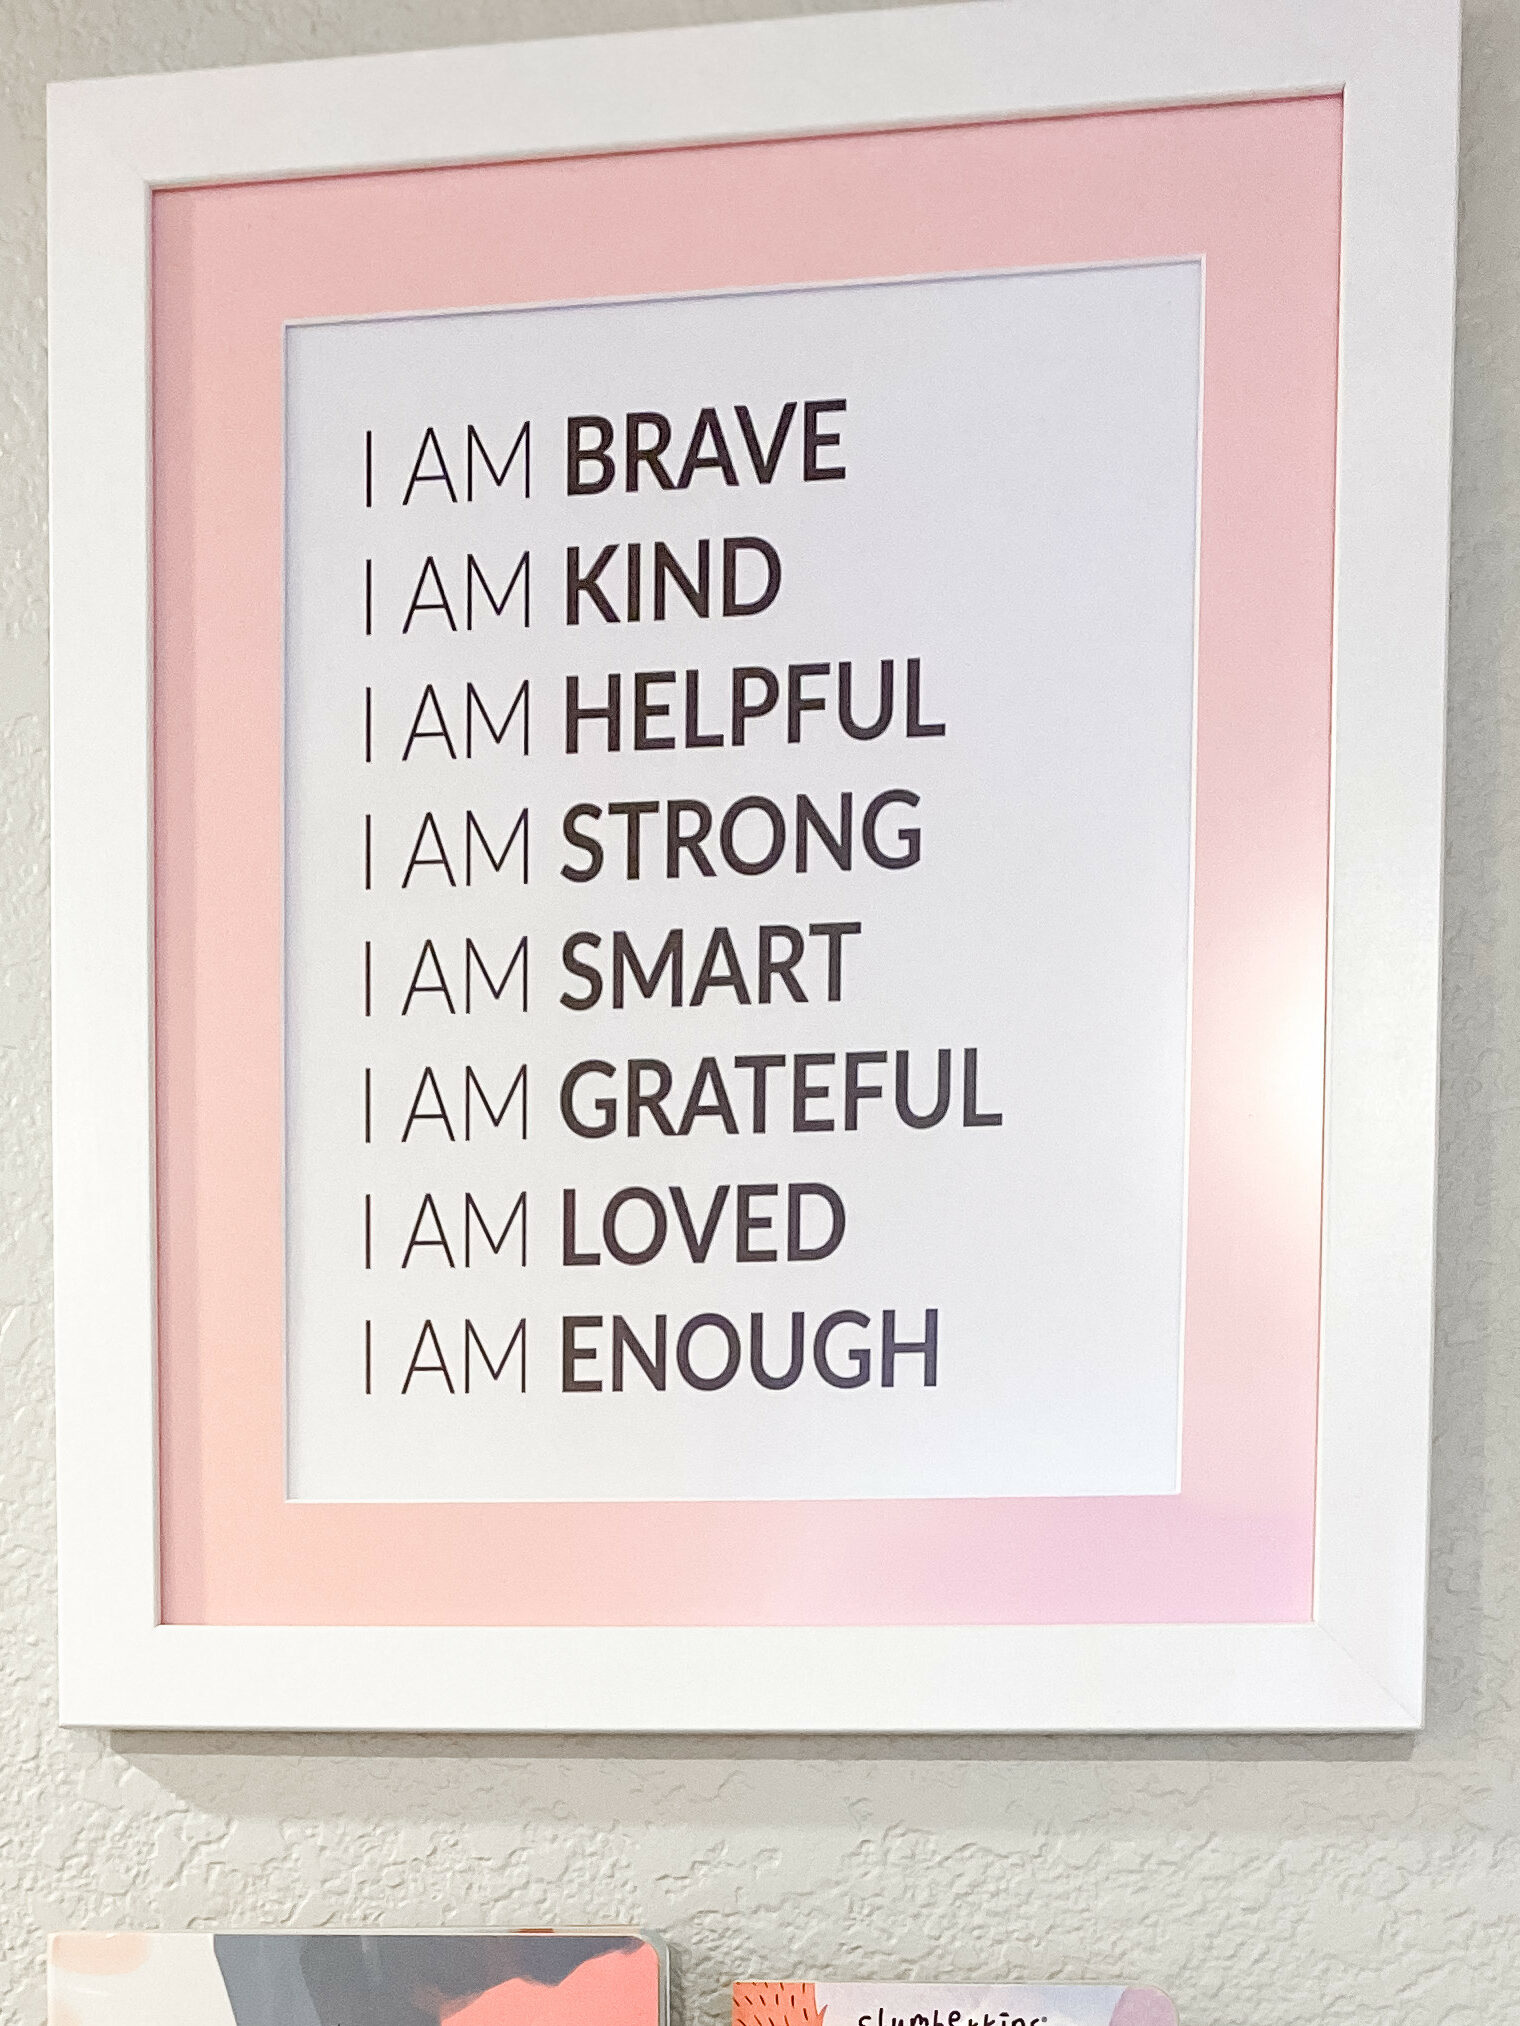 Yoga Room Decor - An inspirational message can motivate you even on your lazy days!
